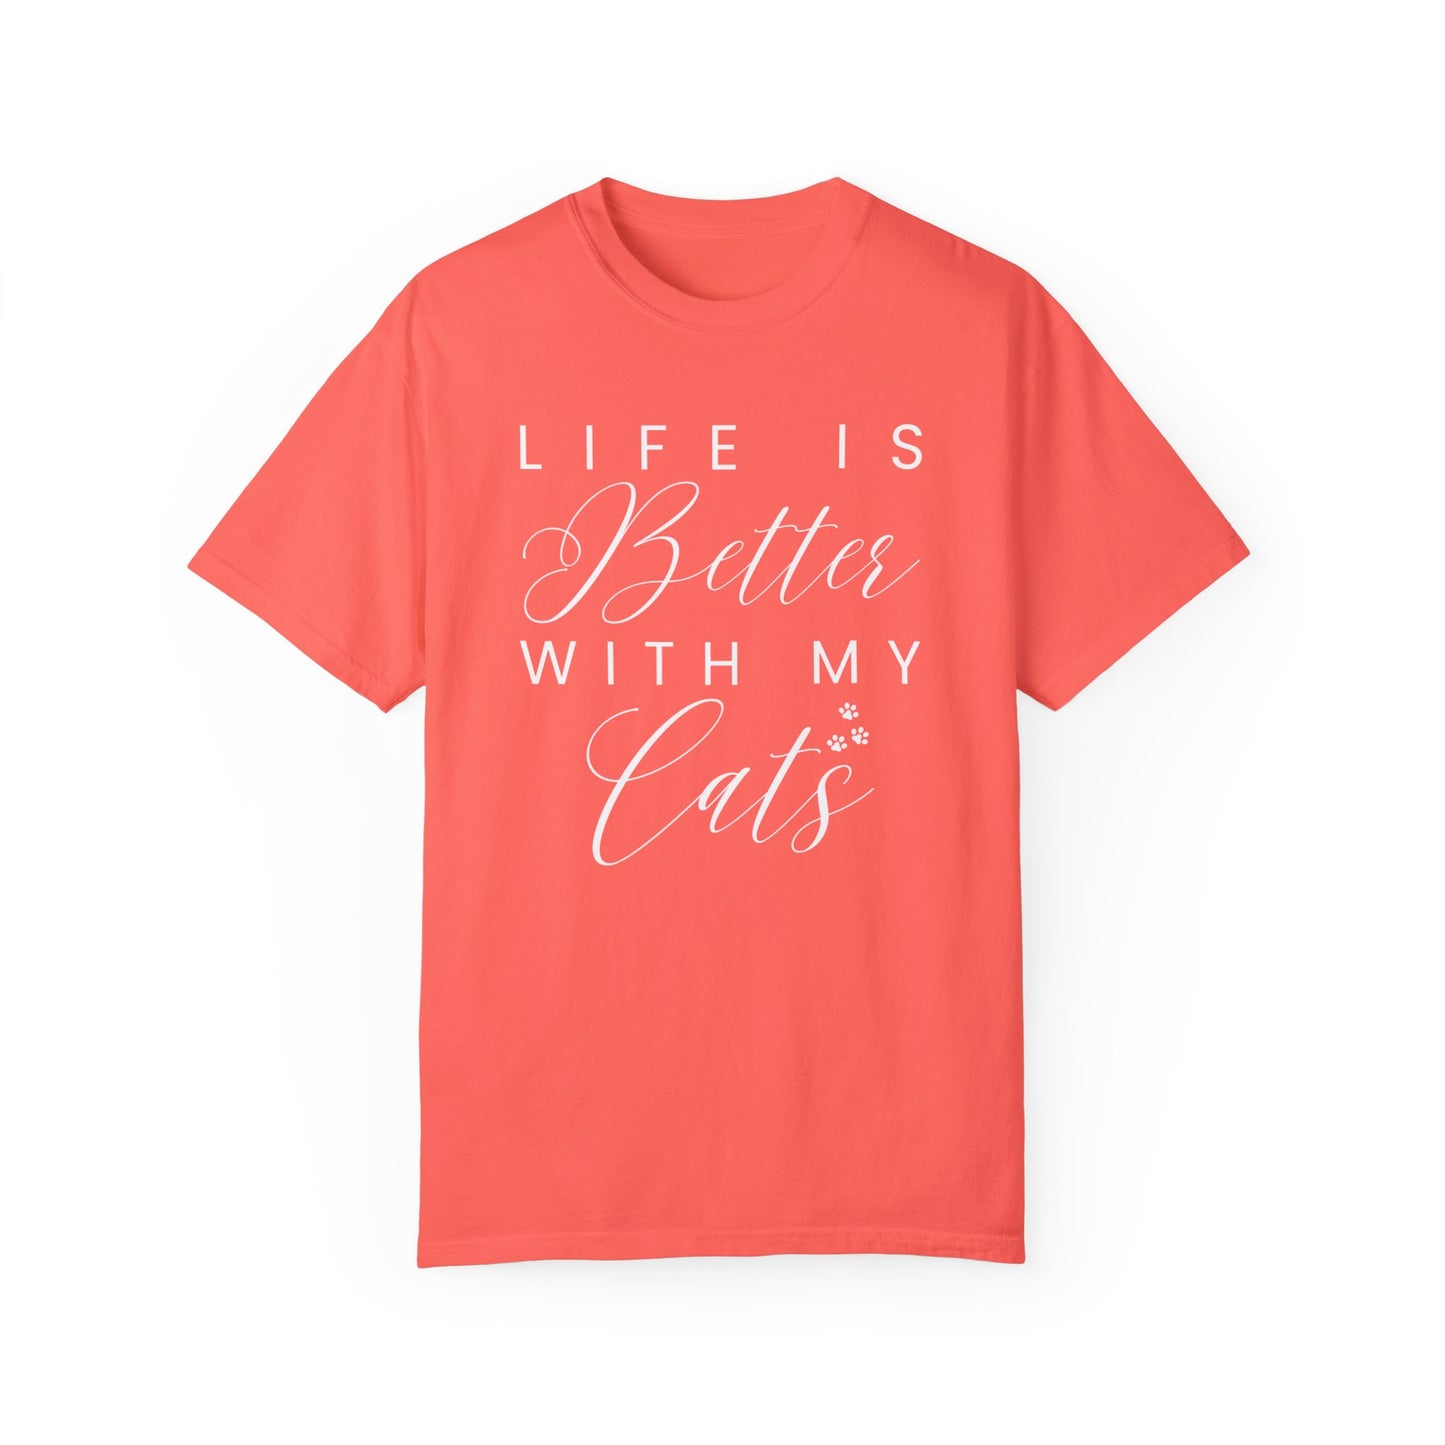 Women's Comfort Colors Tee - Life is Better with My Cats - Eddy and Rita